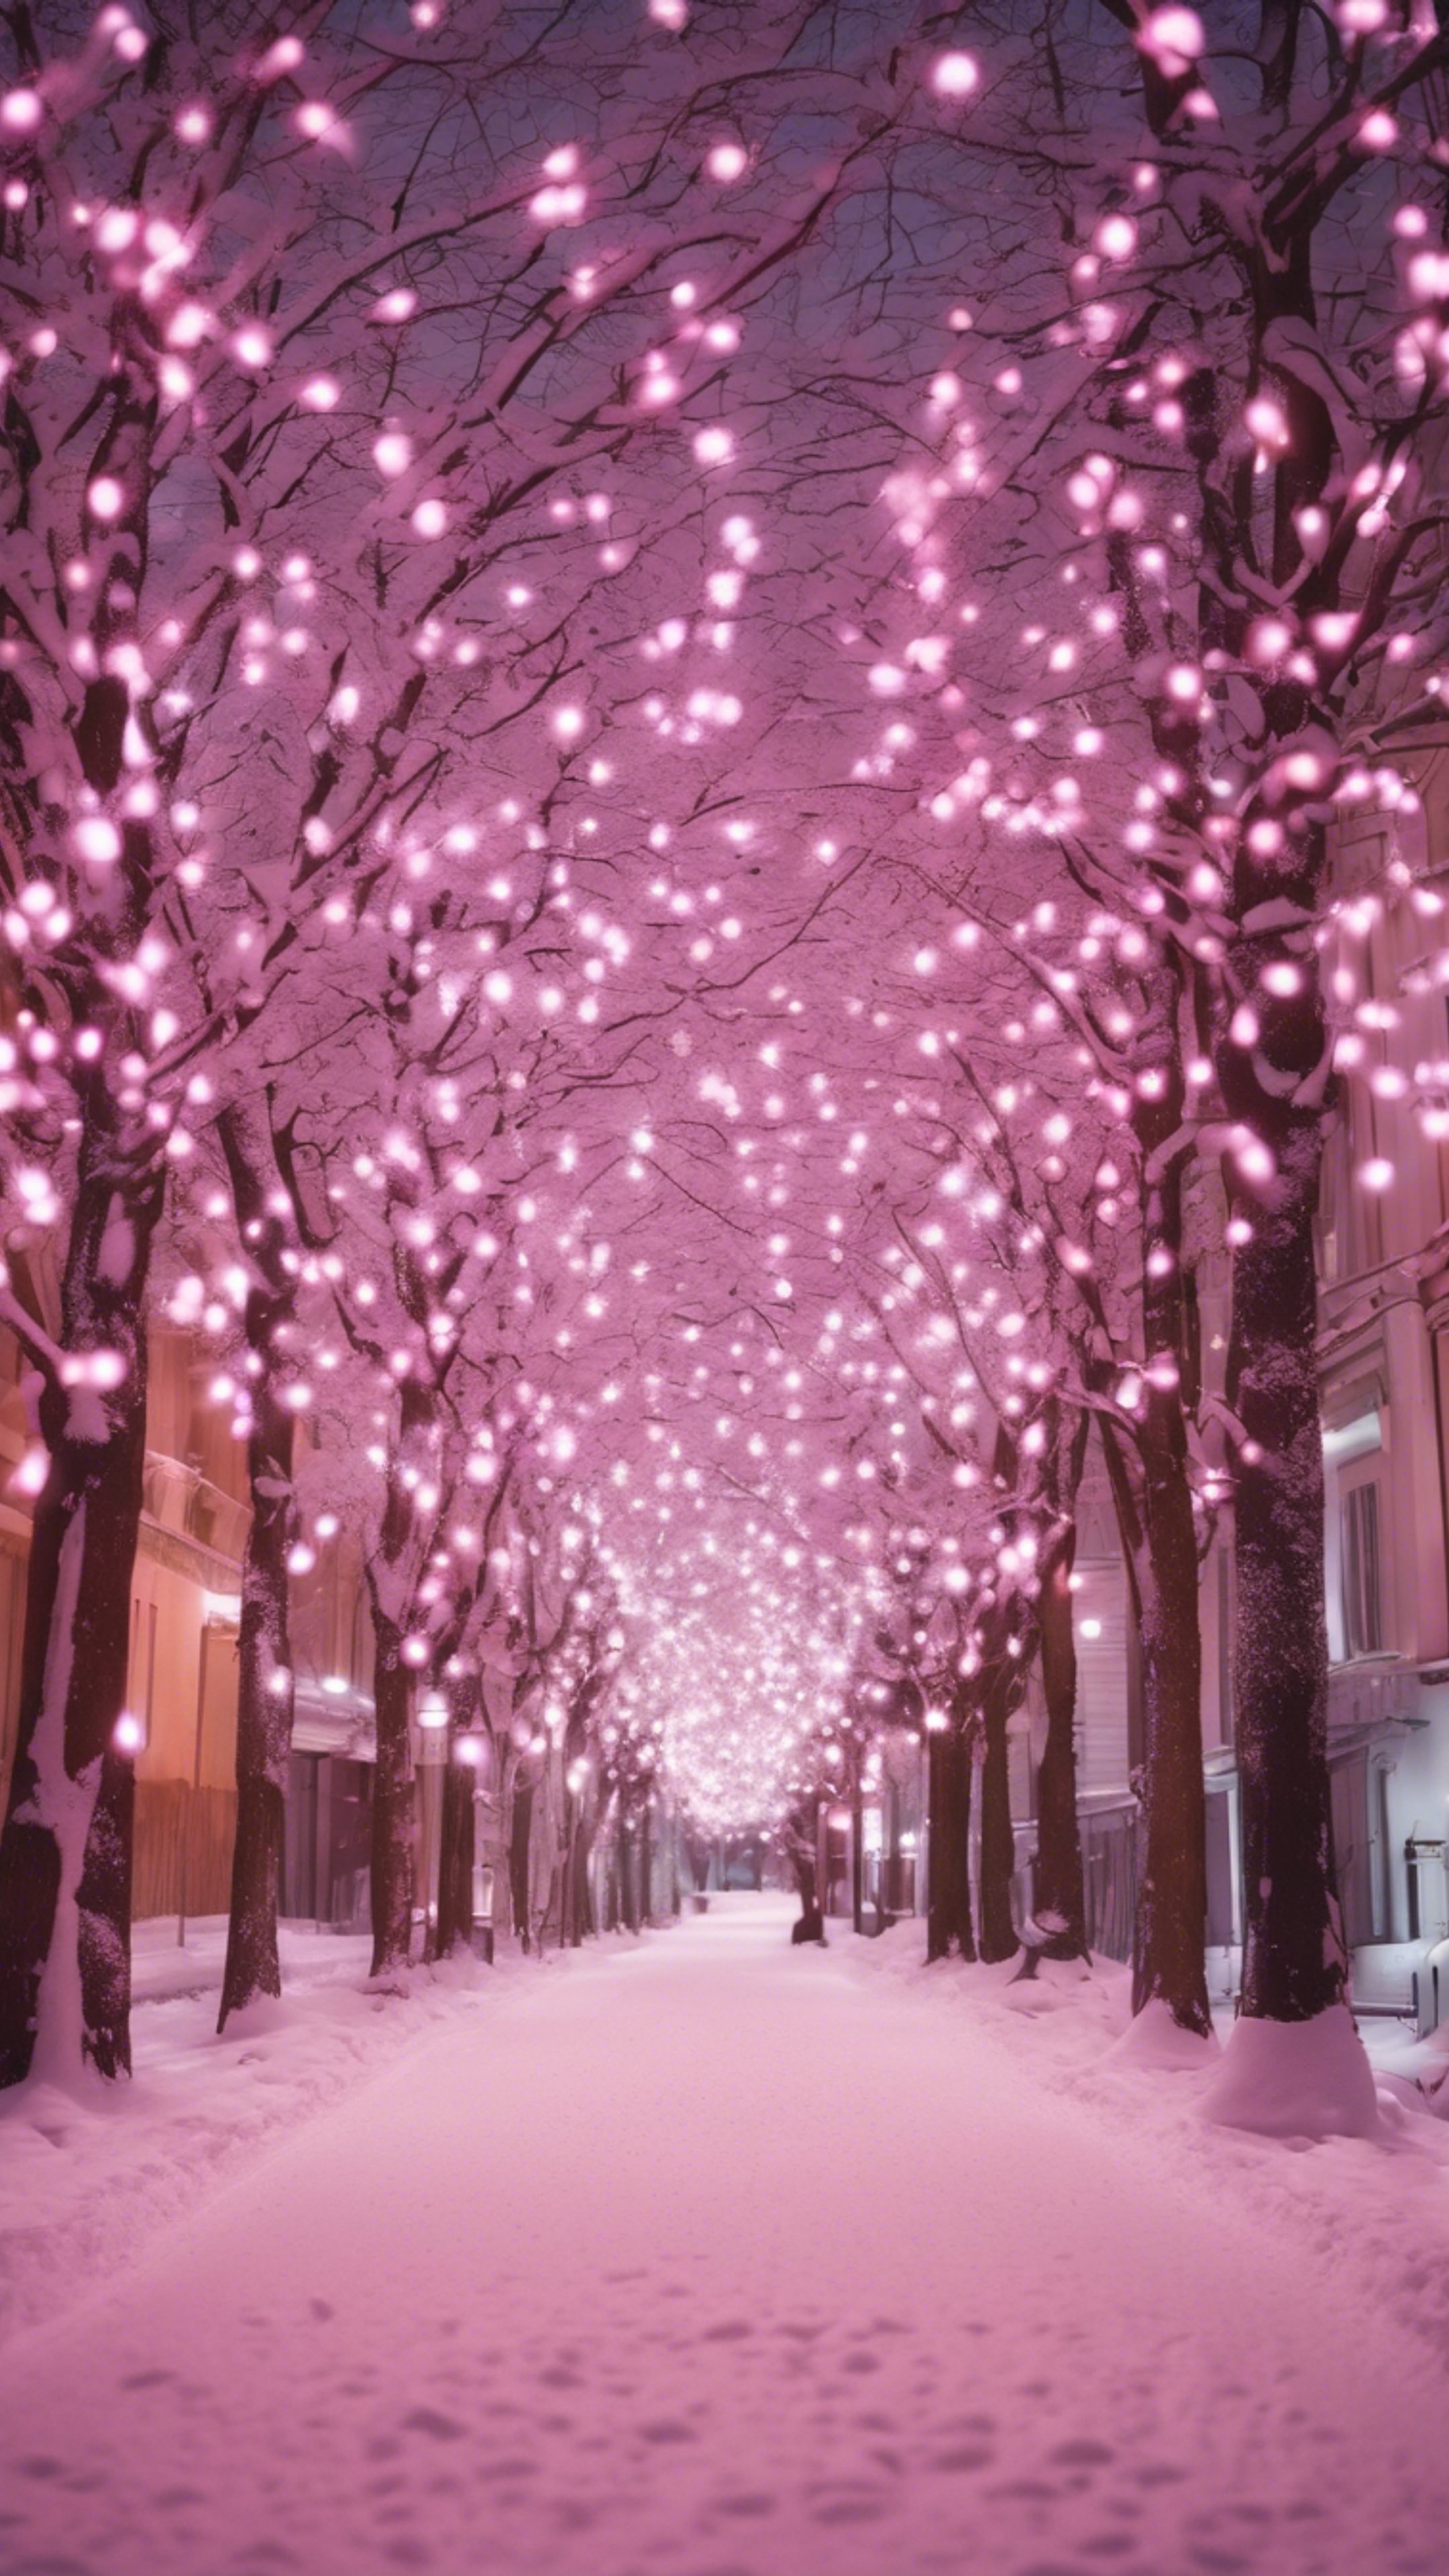 A snow-covered street illuminated by twinkling pink Christmas lights. Tapeta[4ec6c372f2074900819e]